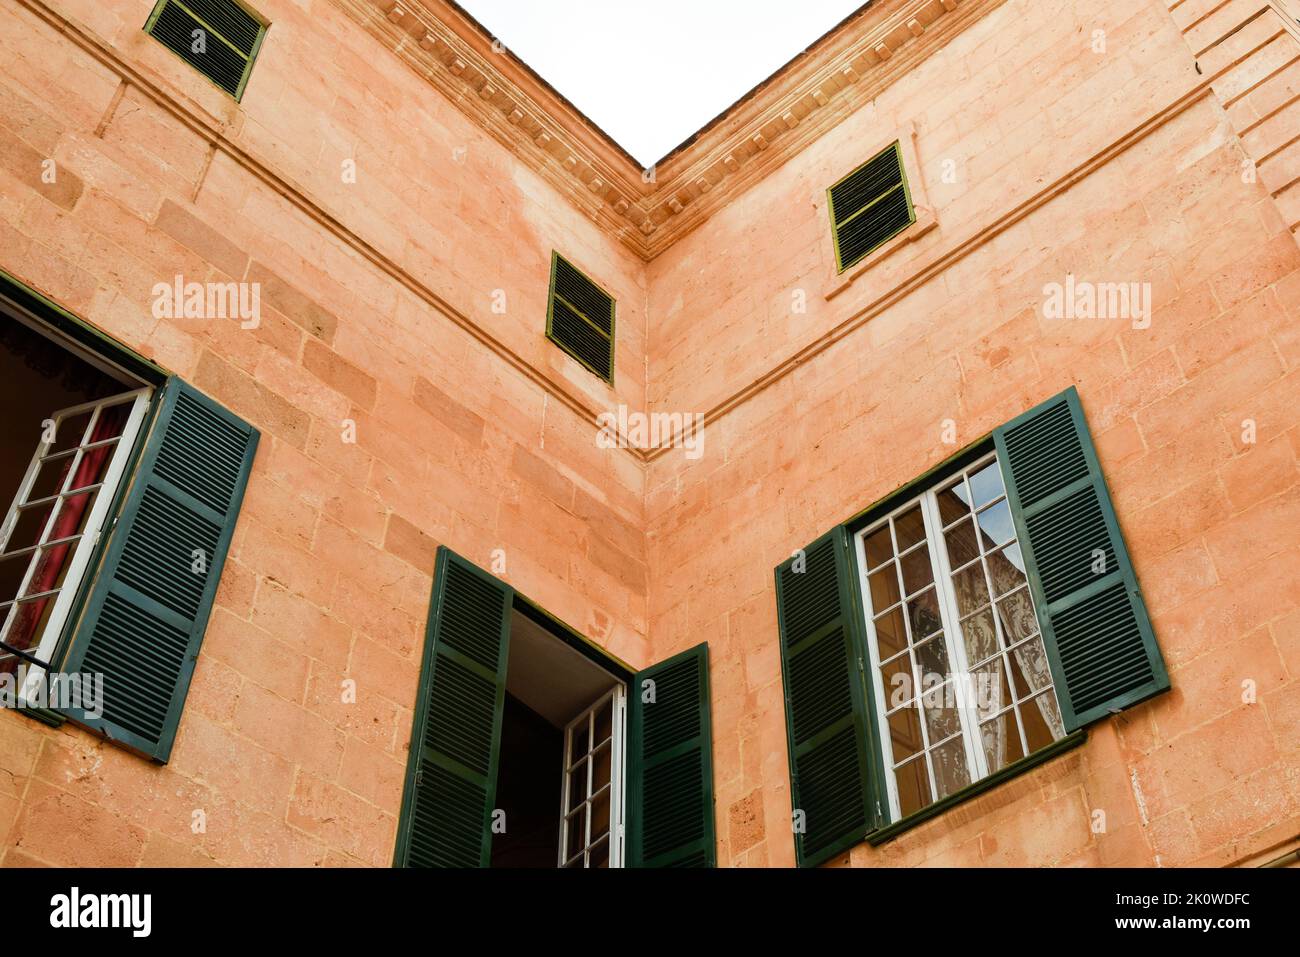 Abstract of building exterior with archtectural detail and shuttered windows Stock Photo